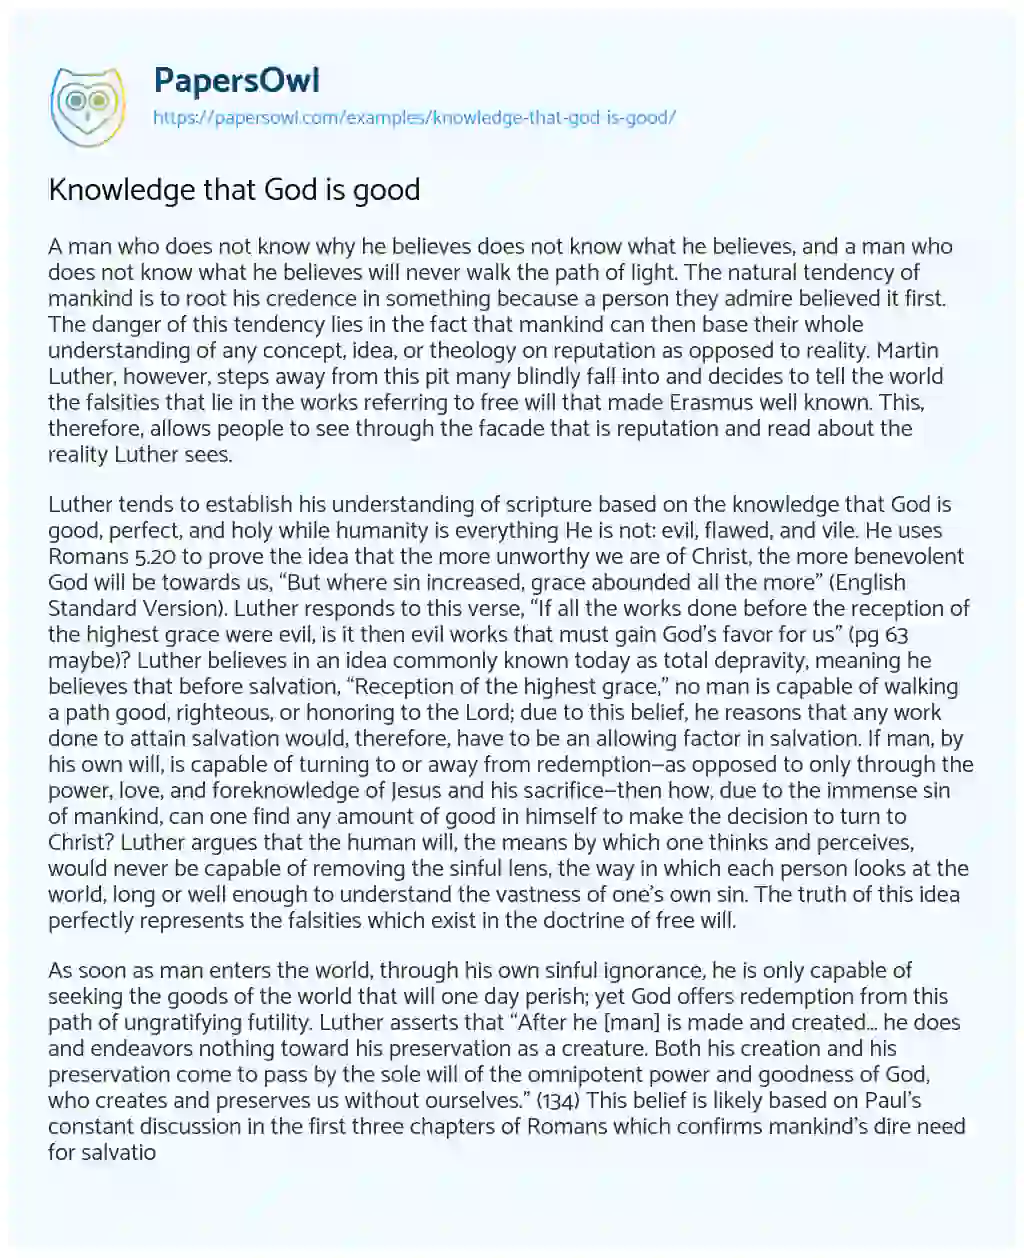 Knowledge that God is Good essay